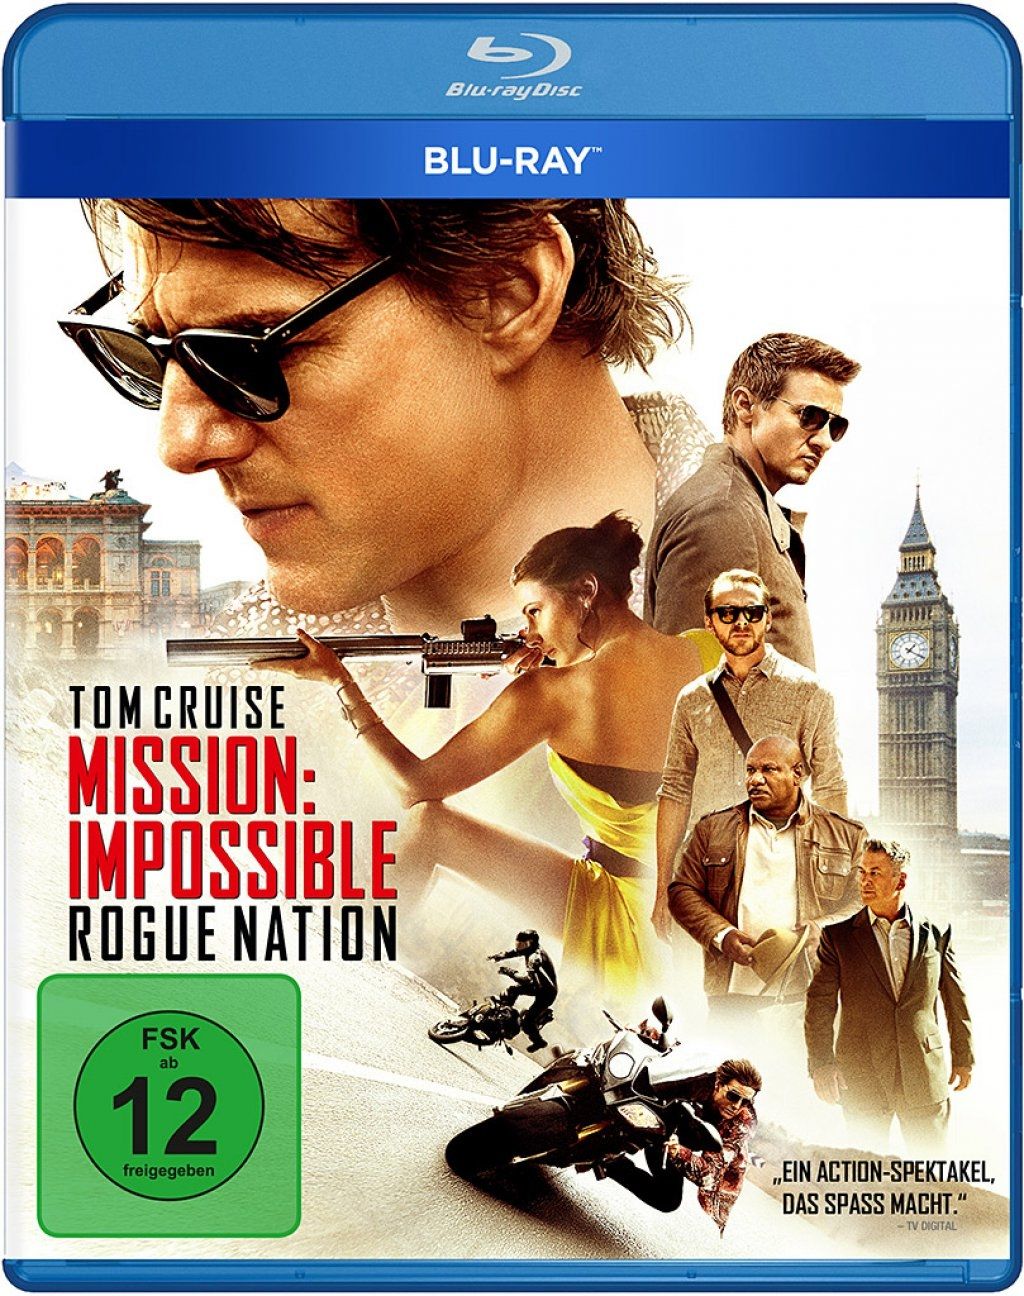 Mission: Impossible 5 - Rogue Nation (BLURAY)